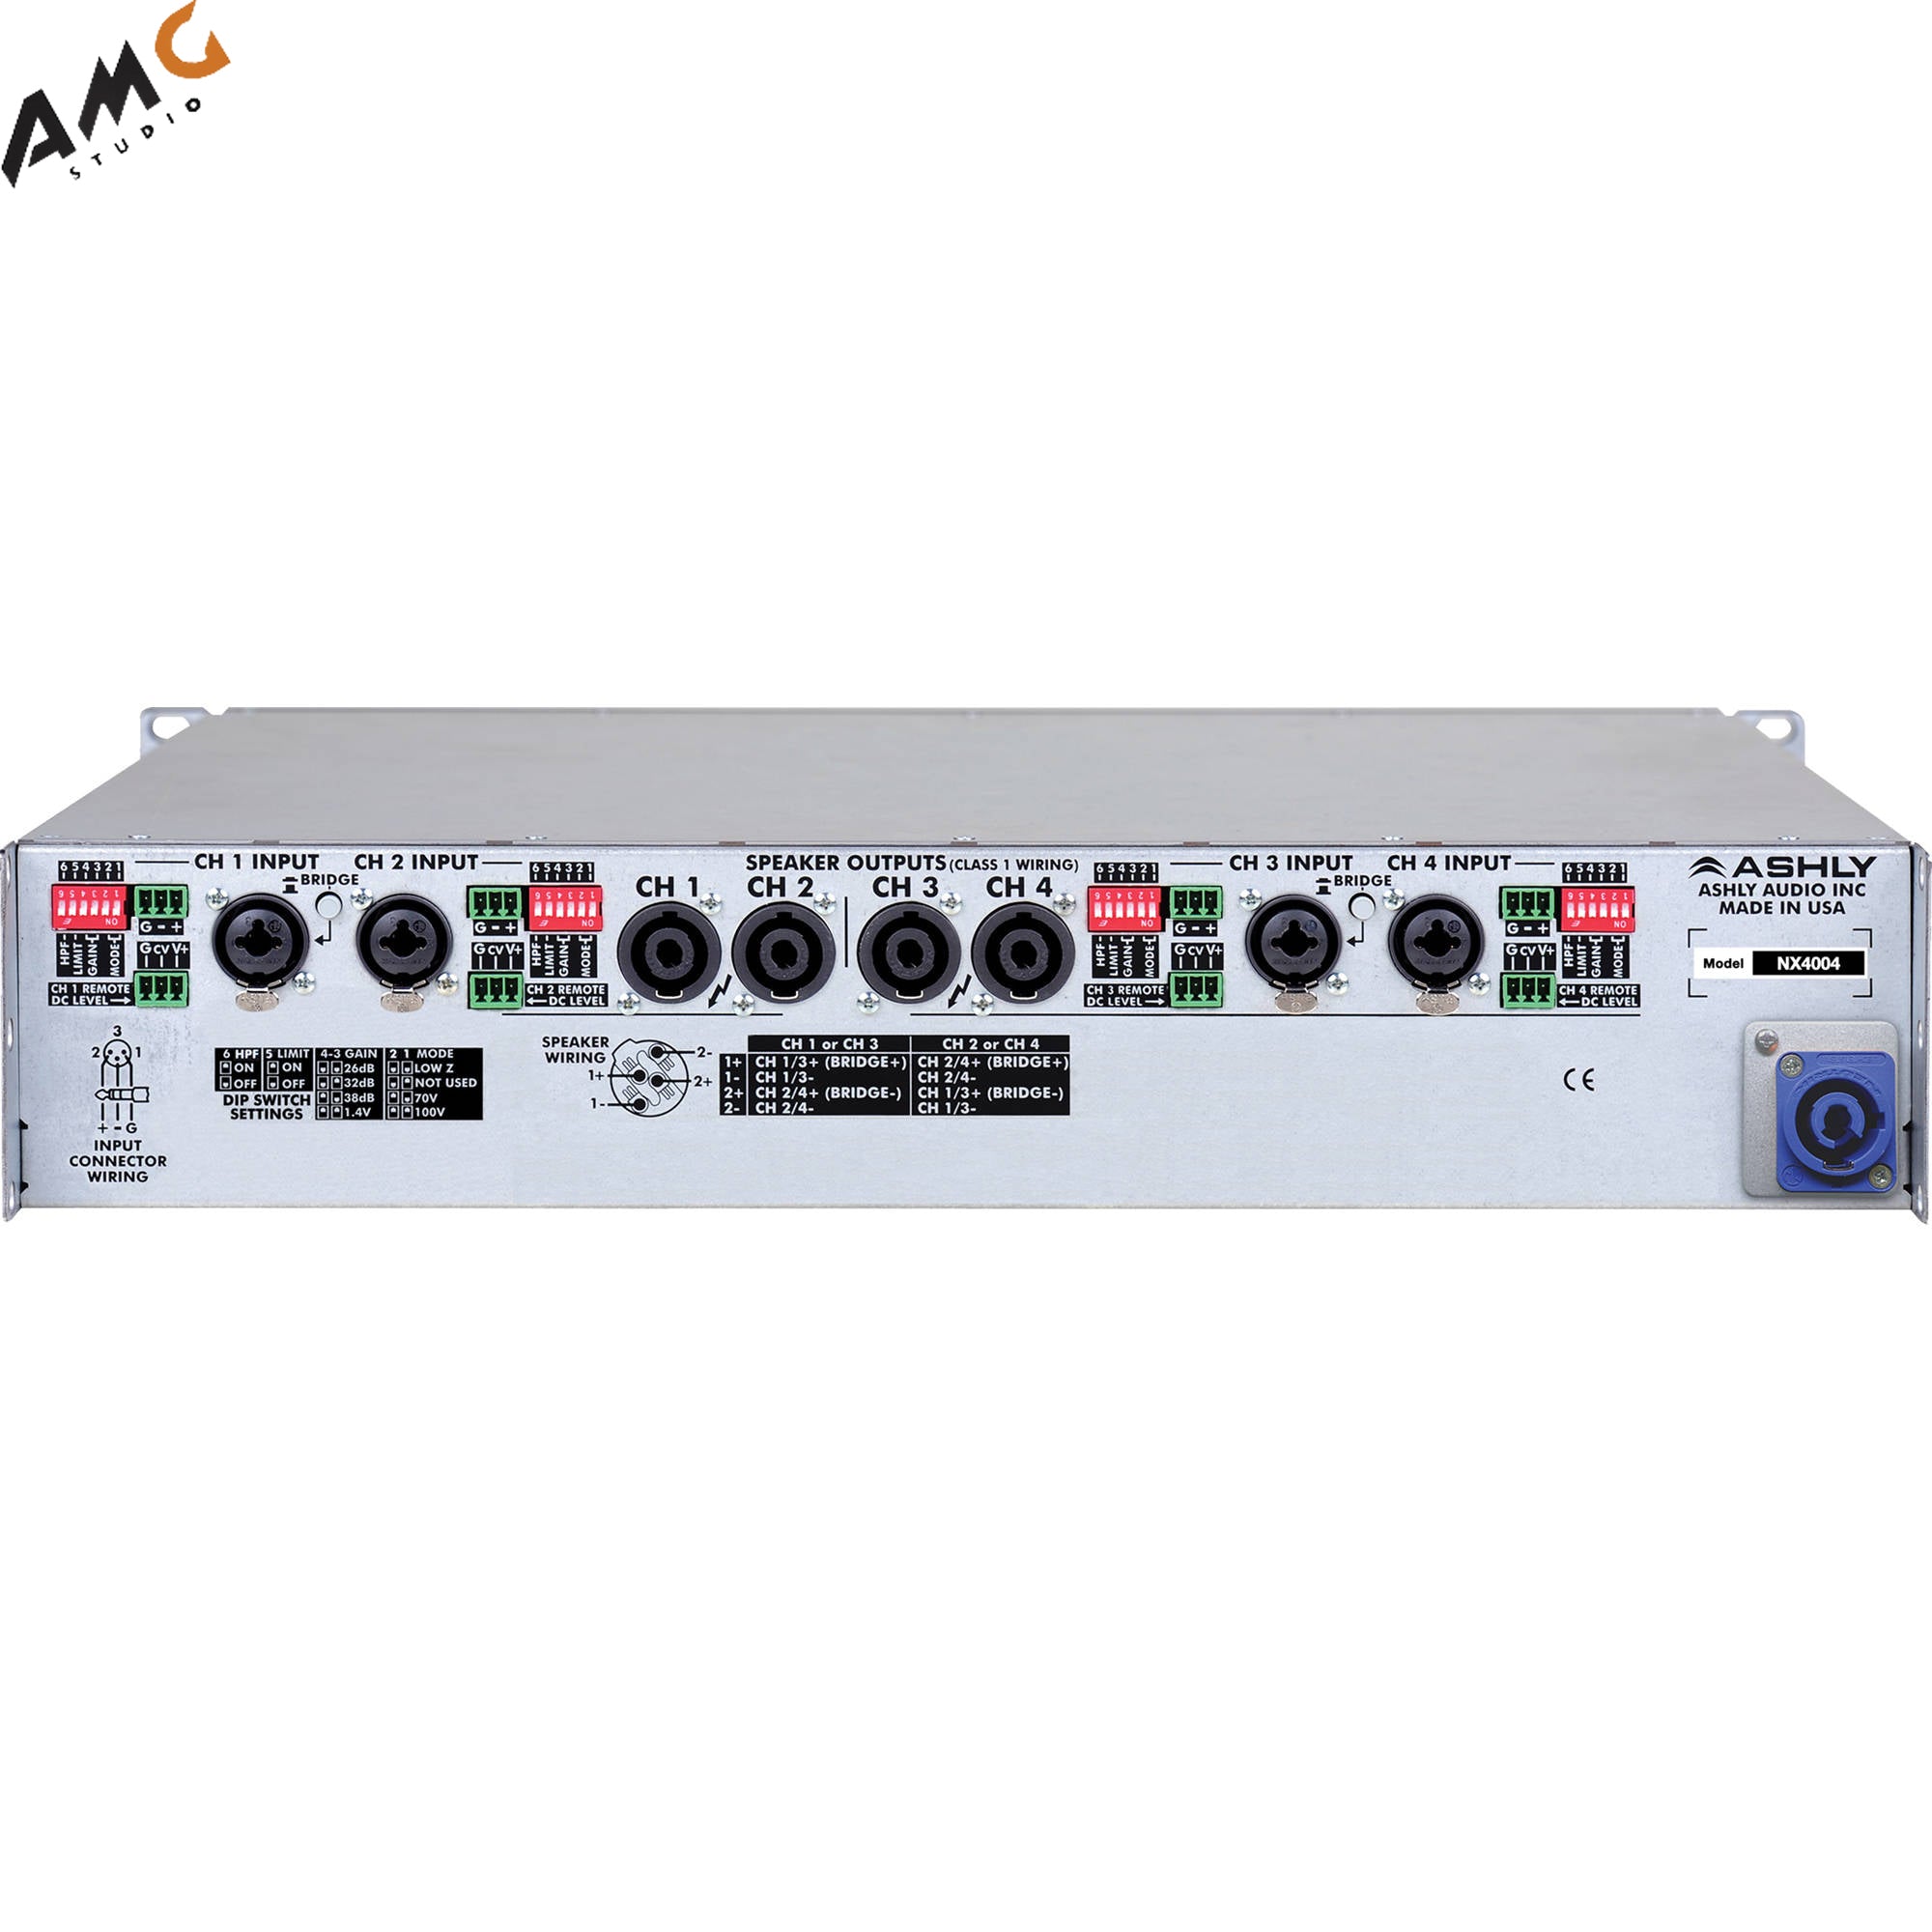 Ashly nXp4004 Network Power Amplifier 4 x 400 Watts/2 Ohms with Protea DSP - Studio AMG